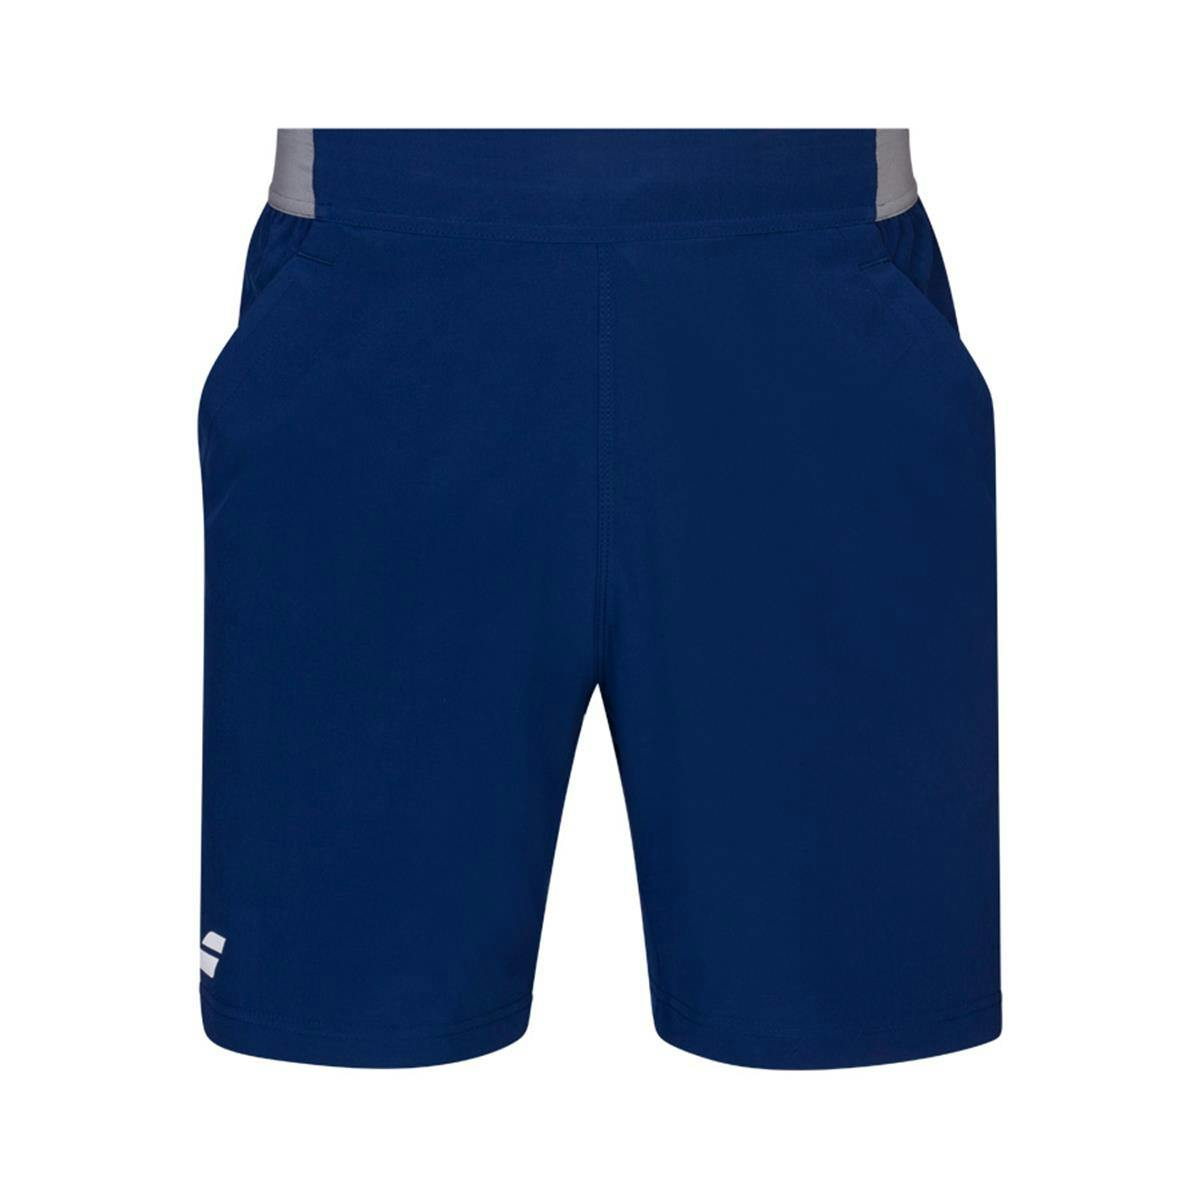 Babolat Boys' Compete 4.5in Tennis Shorts